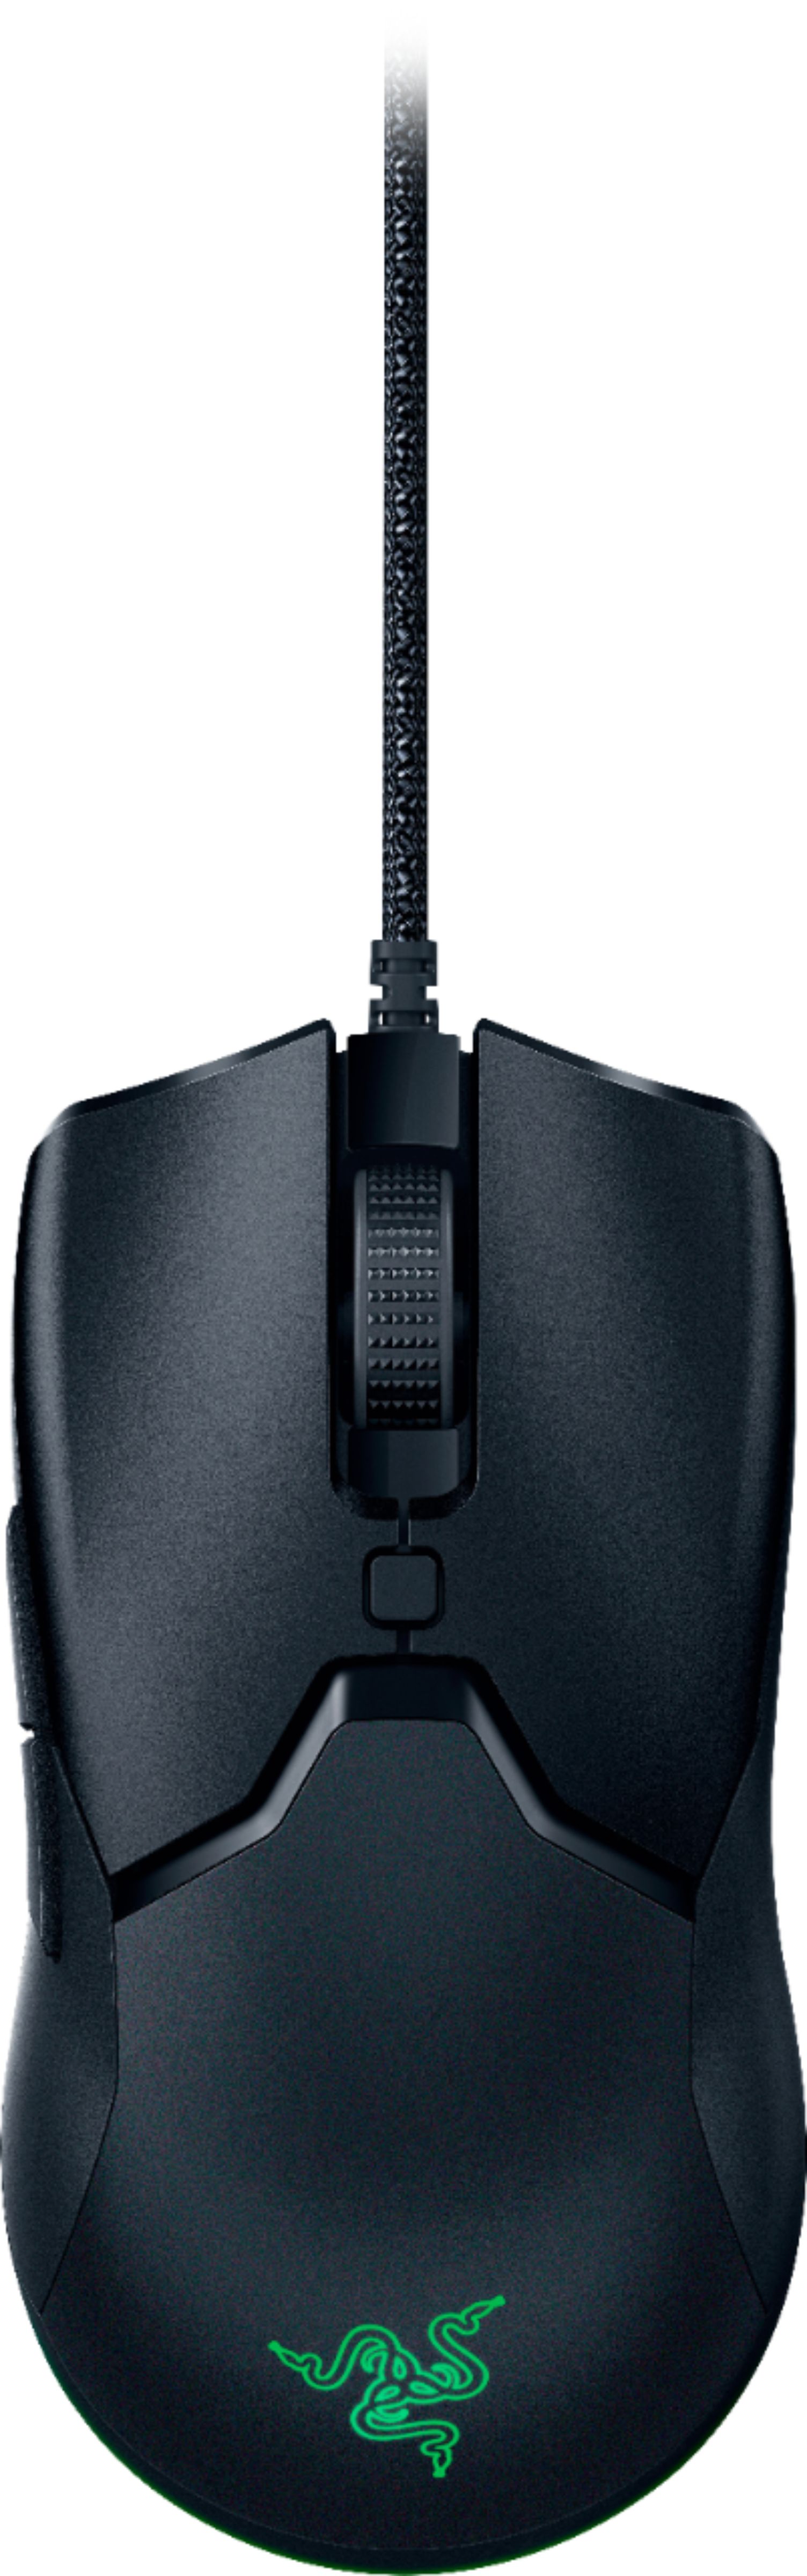 The Razer Viper Mini Gaming Mouse Review - The Budget King